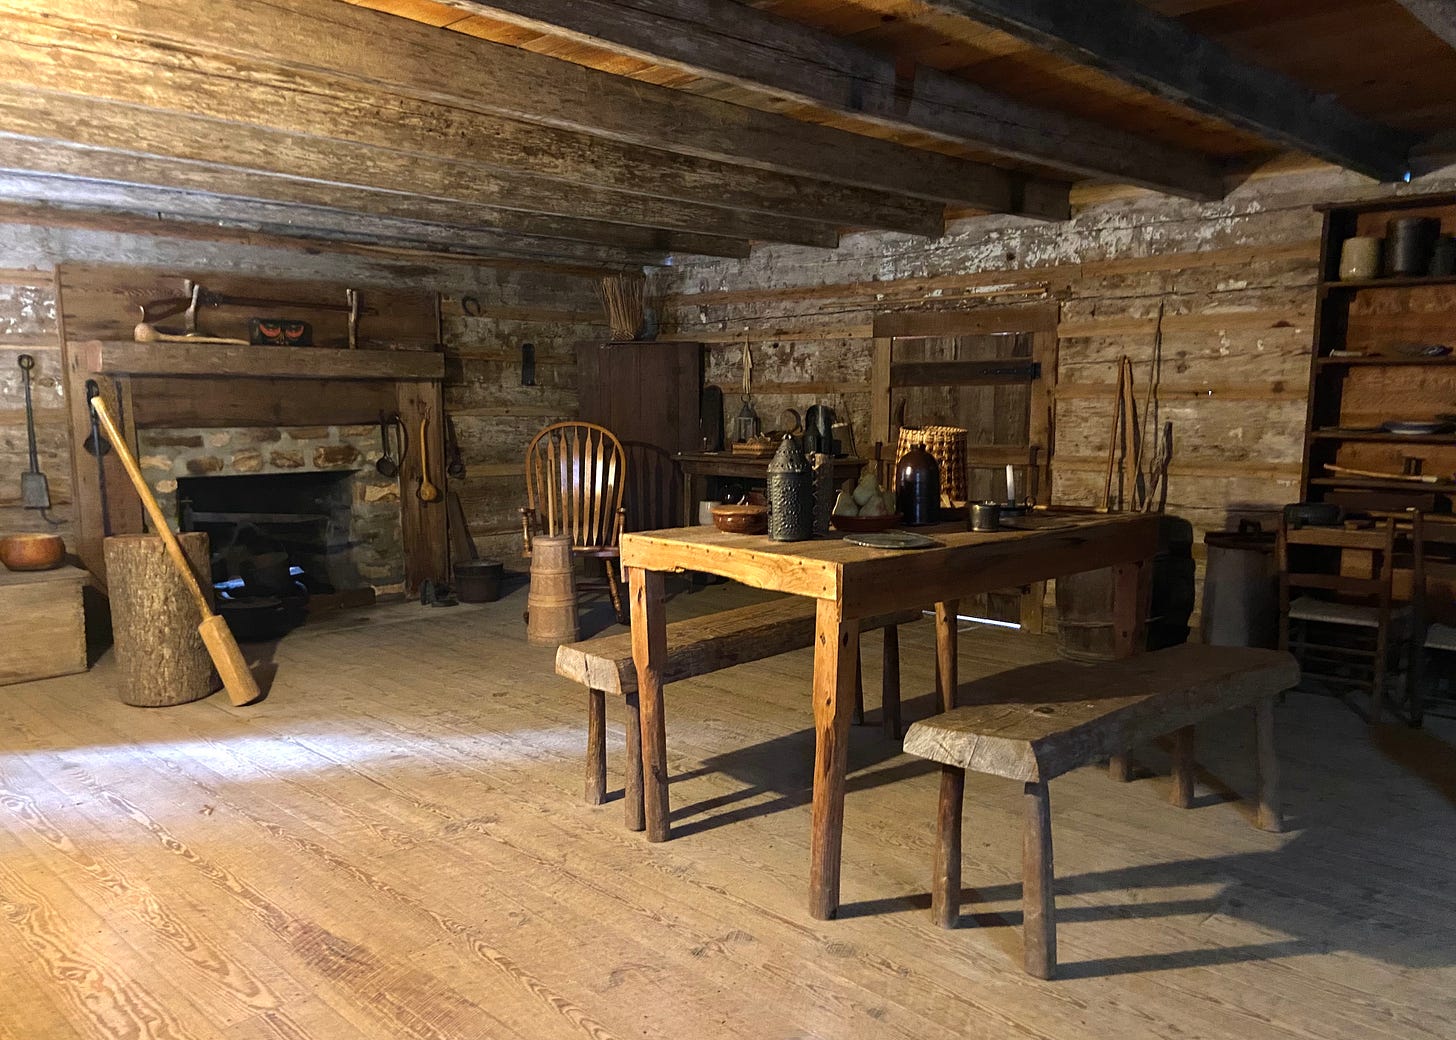 Picture of interior of cabin at New Echota Historic Site